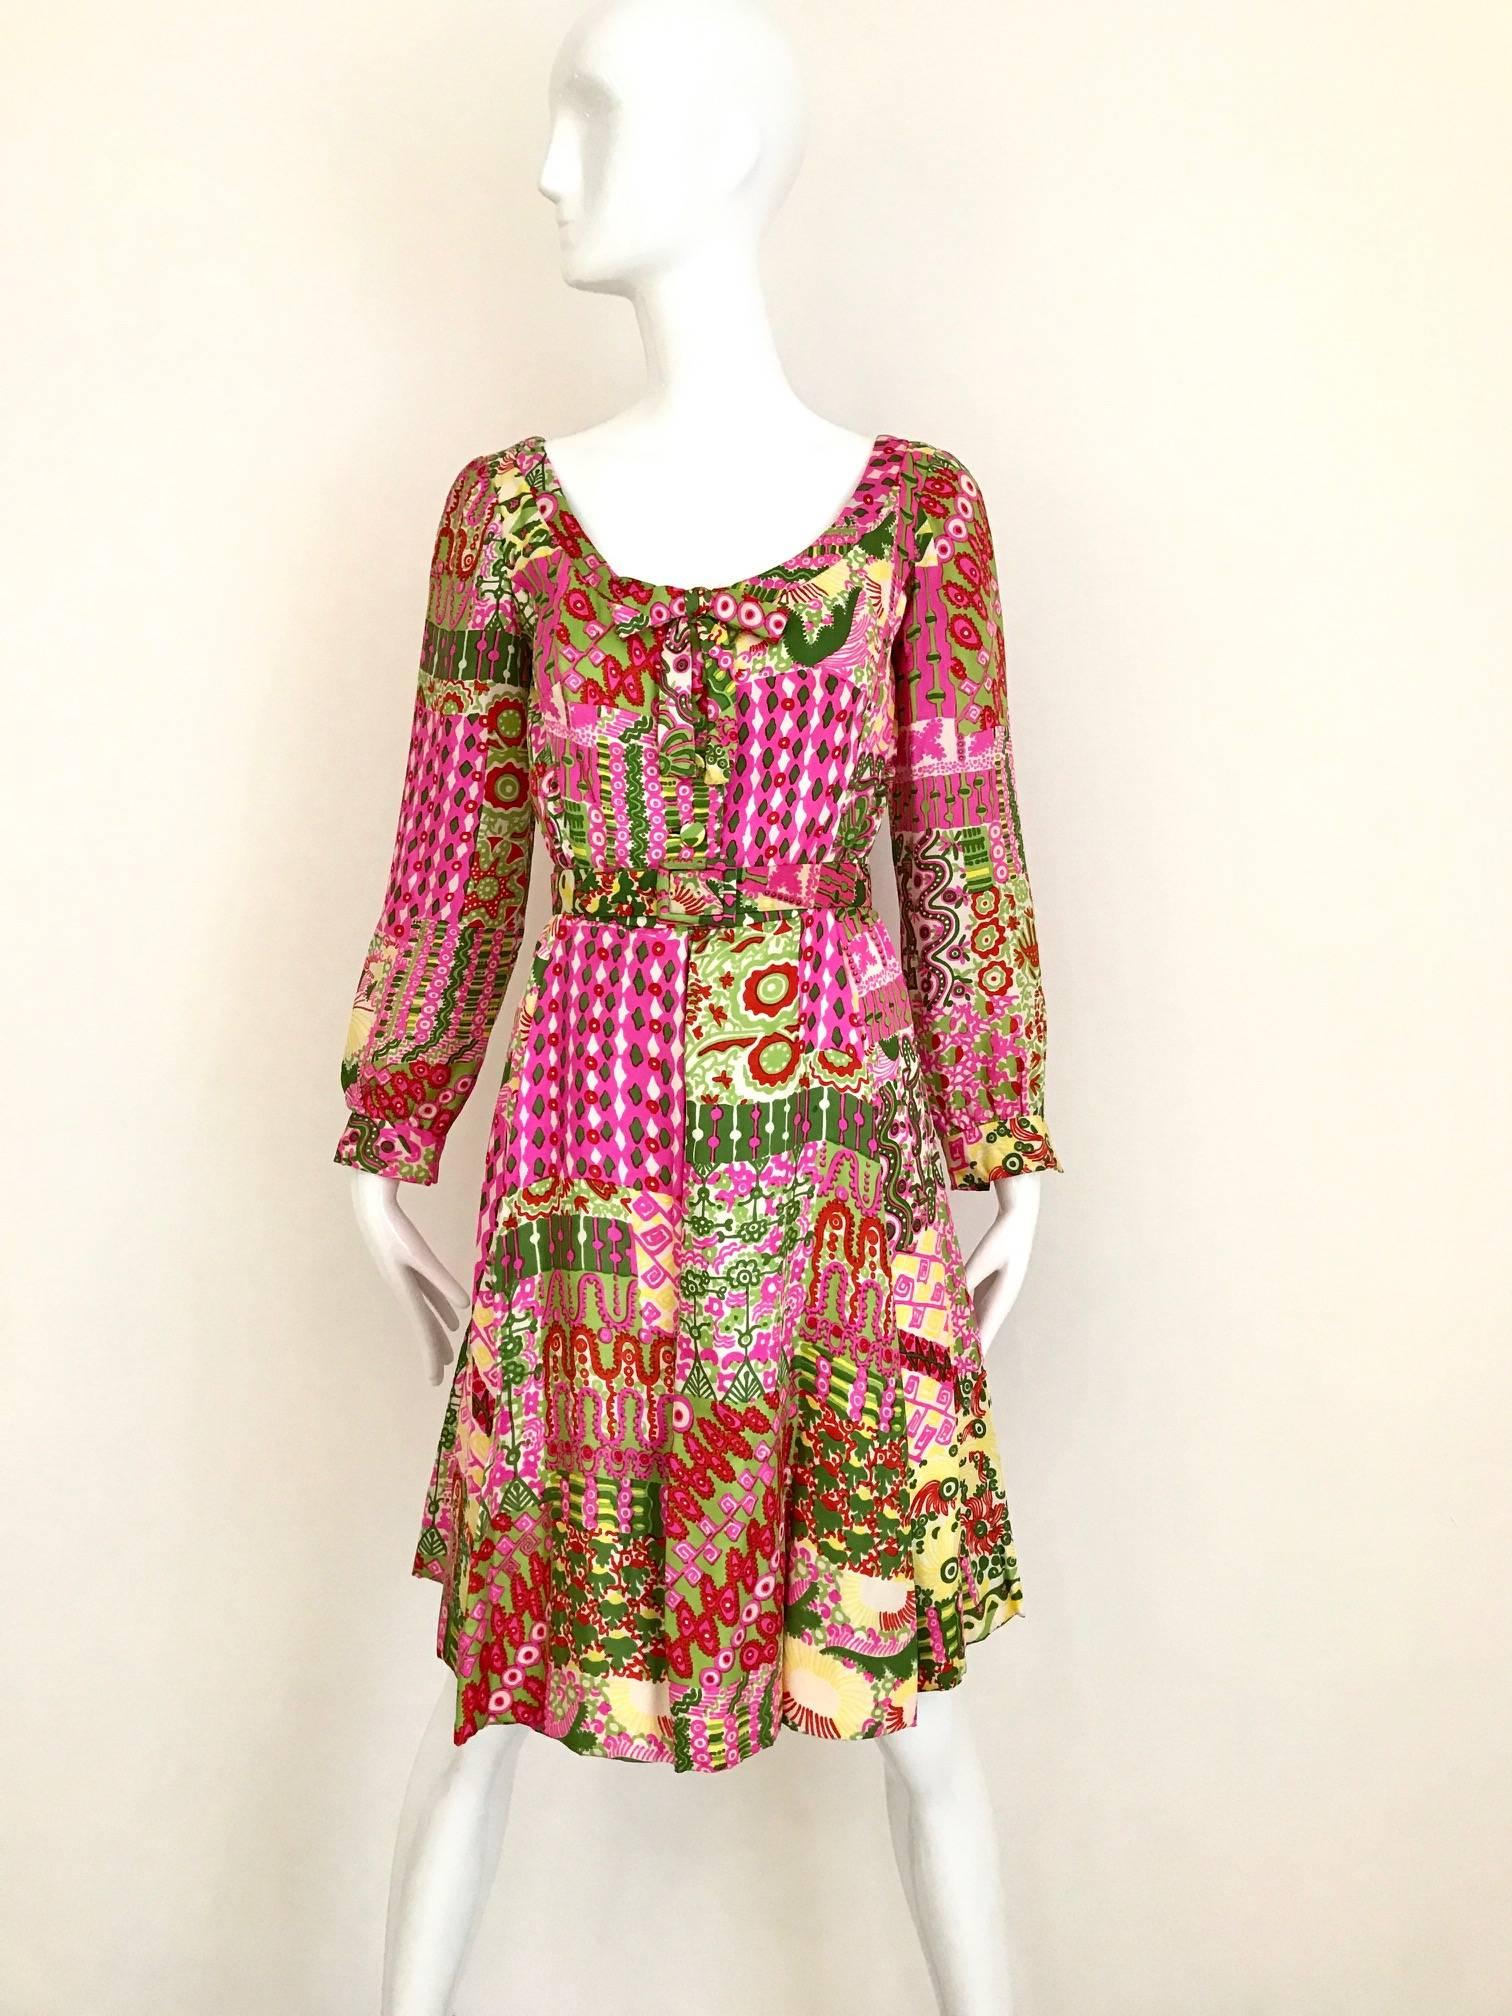 Vintage 1960s Pink, Green and yellow Vibrant Psychedelic Paisley Print Silk 60s Dress featuring scoop neck and covered silk button with belt. Slightly A line skirt.
Bust: 34 inch / Waist: 26 inch / Length: 38 inch
**** This Garment has been